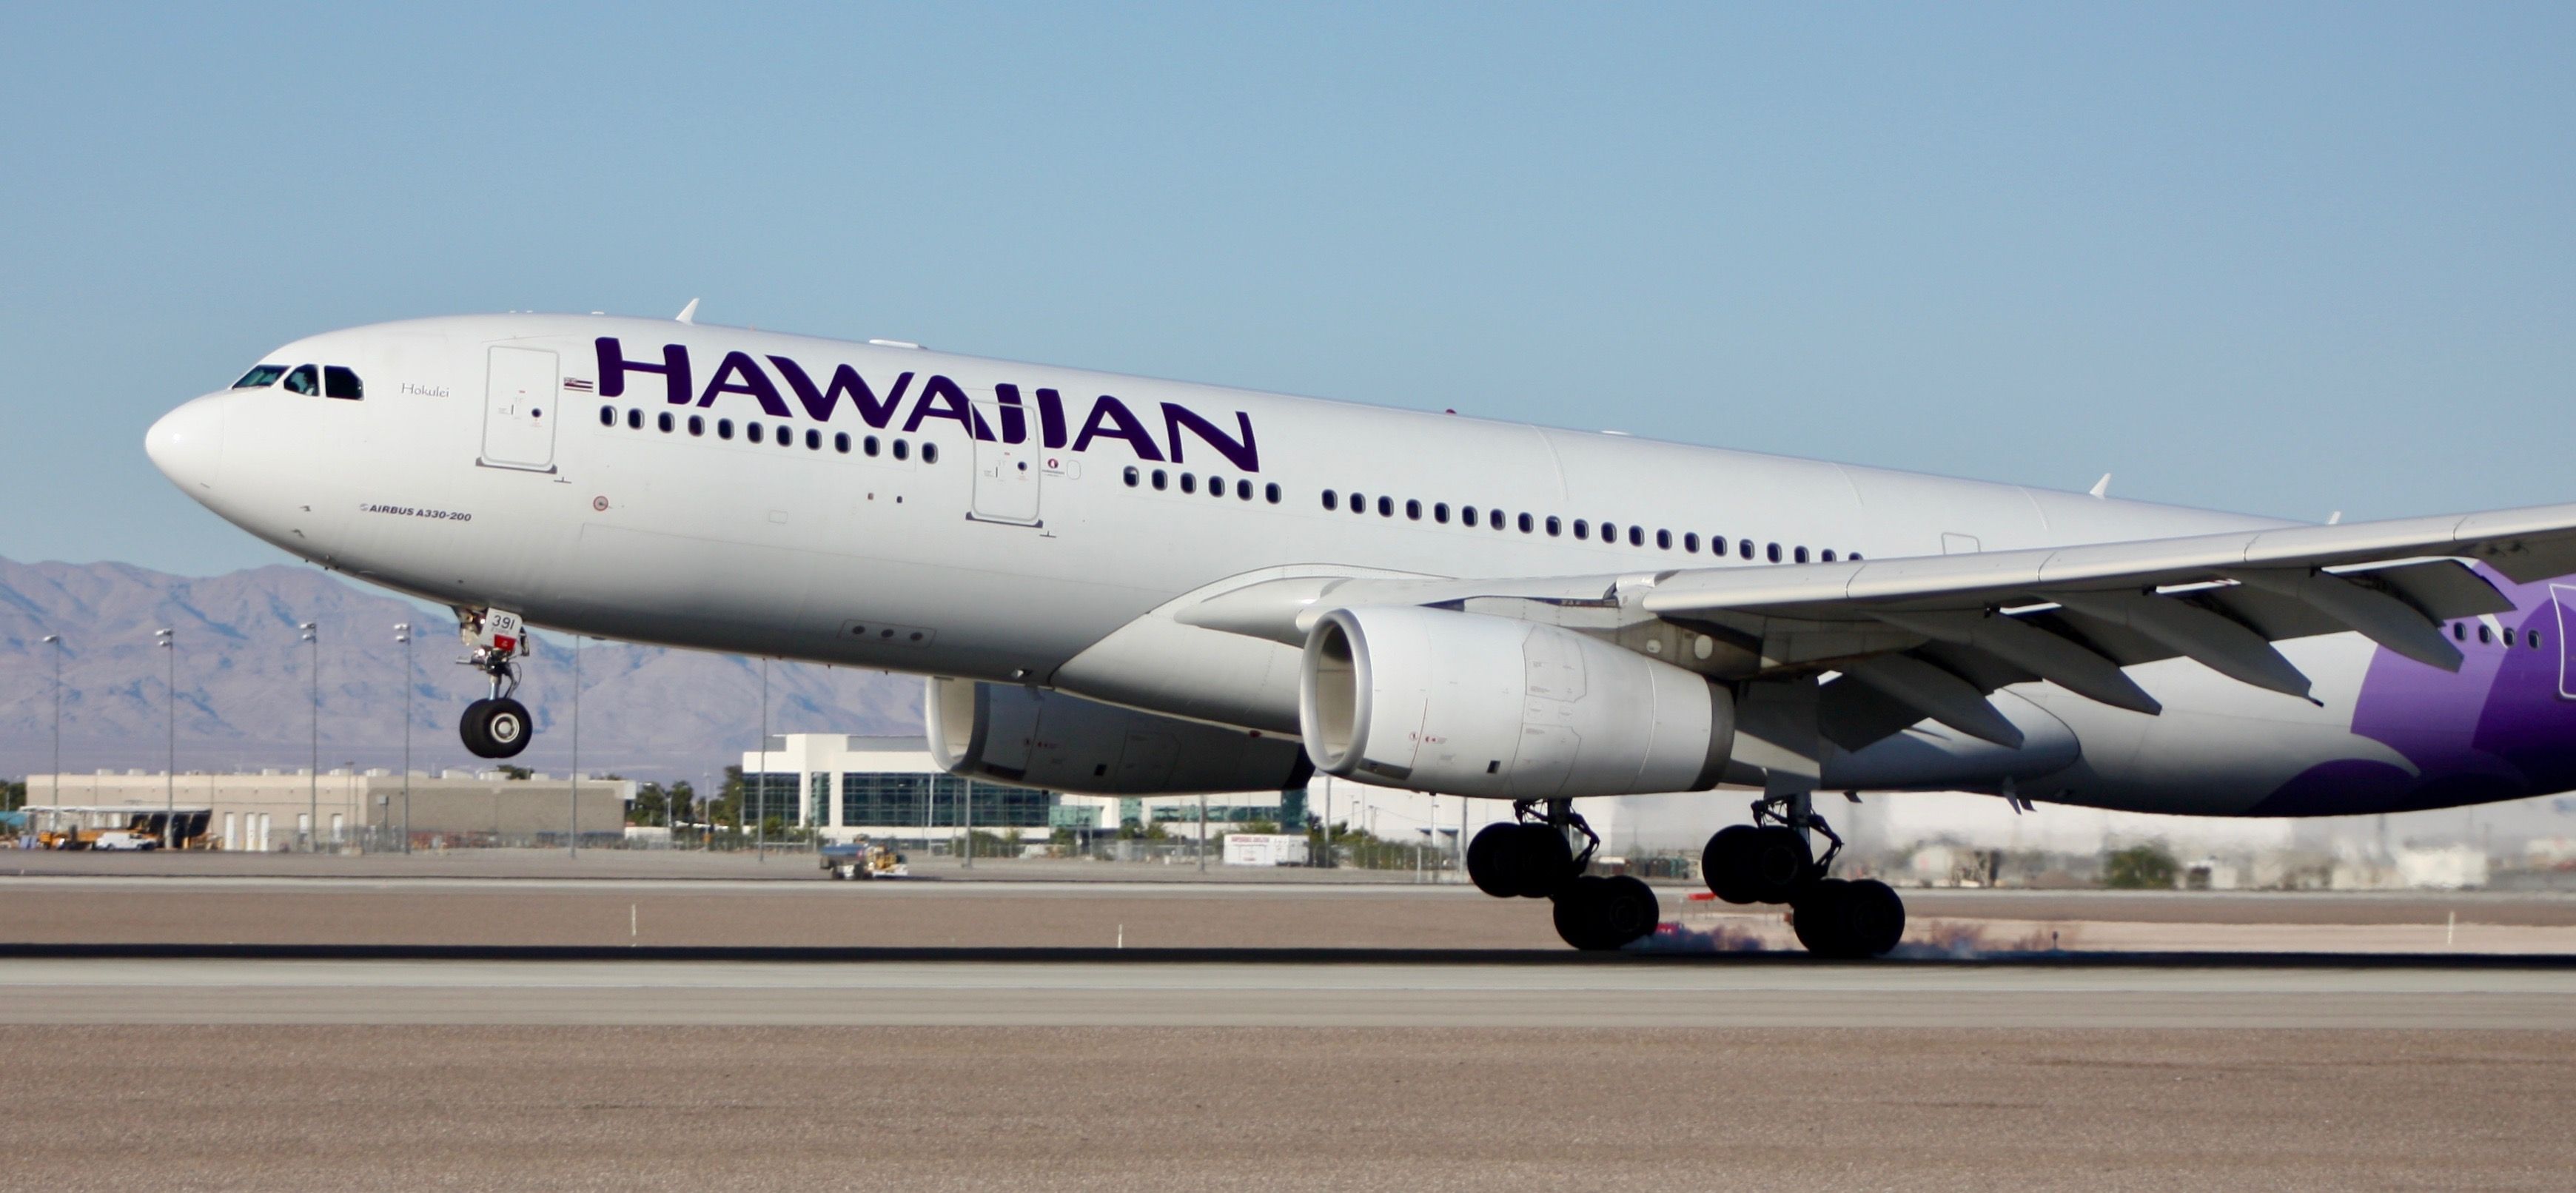 Hawaiian Airlines A330-200 touching down at Harry Reid International Airport.